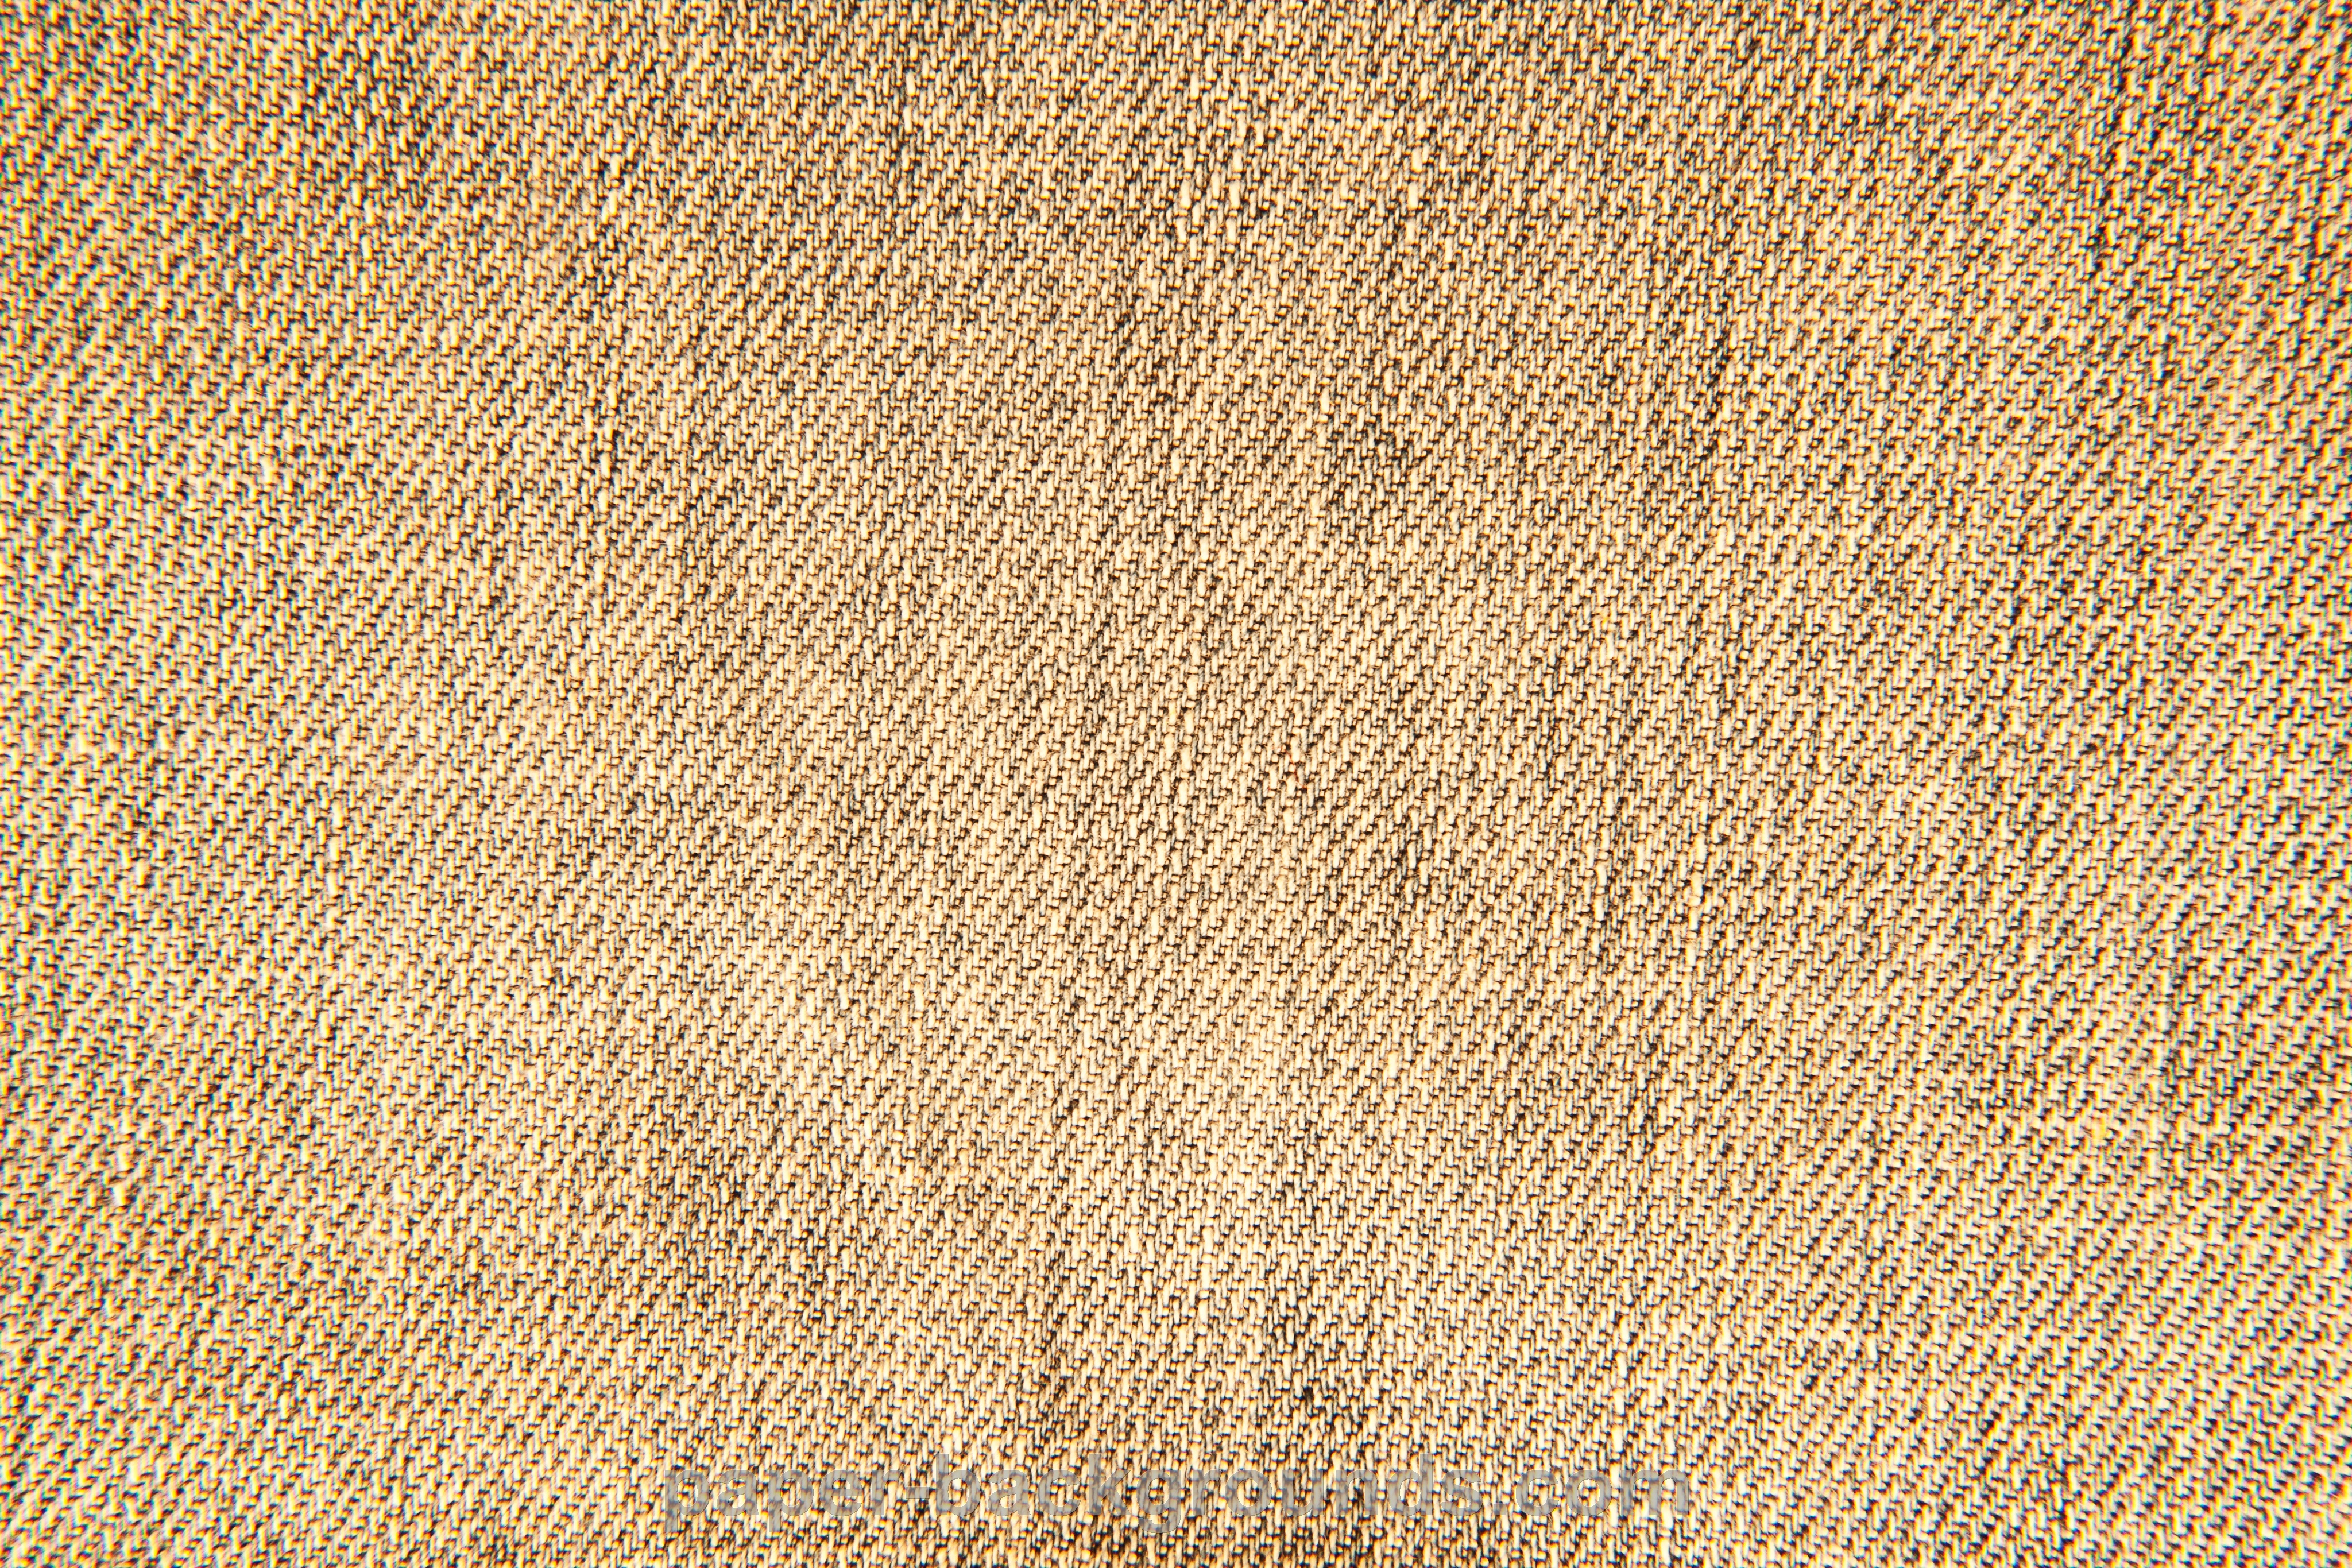 Brown Fabric Texture Background High Resolution Paper Background Html